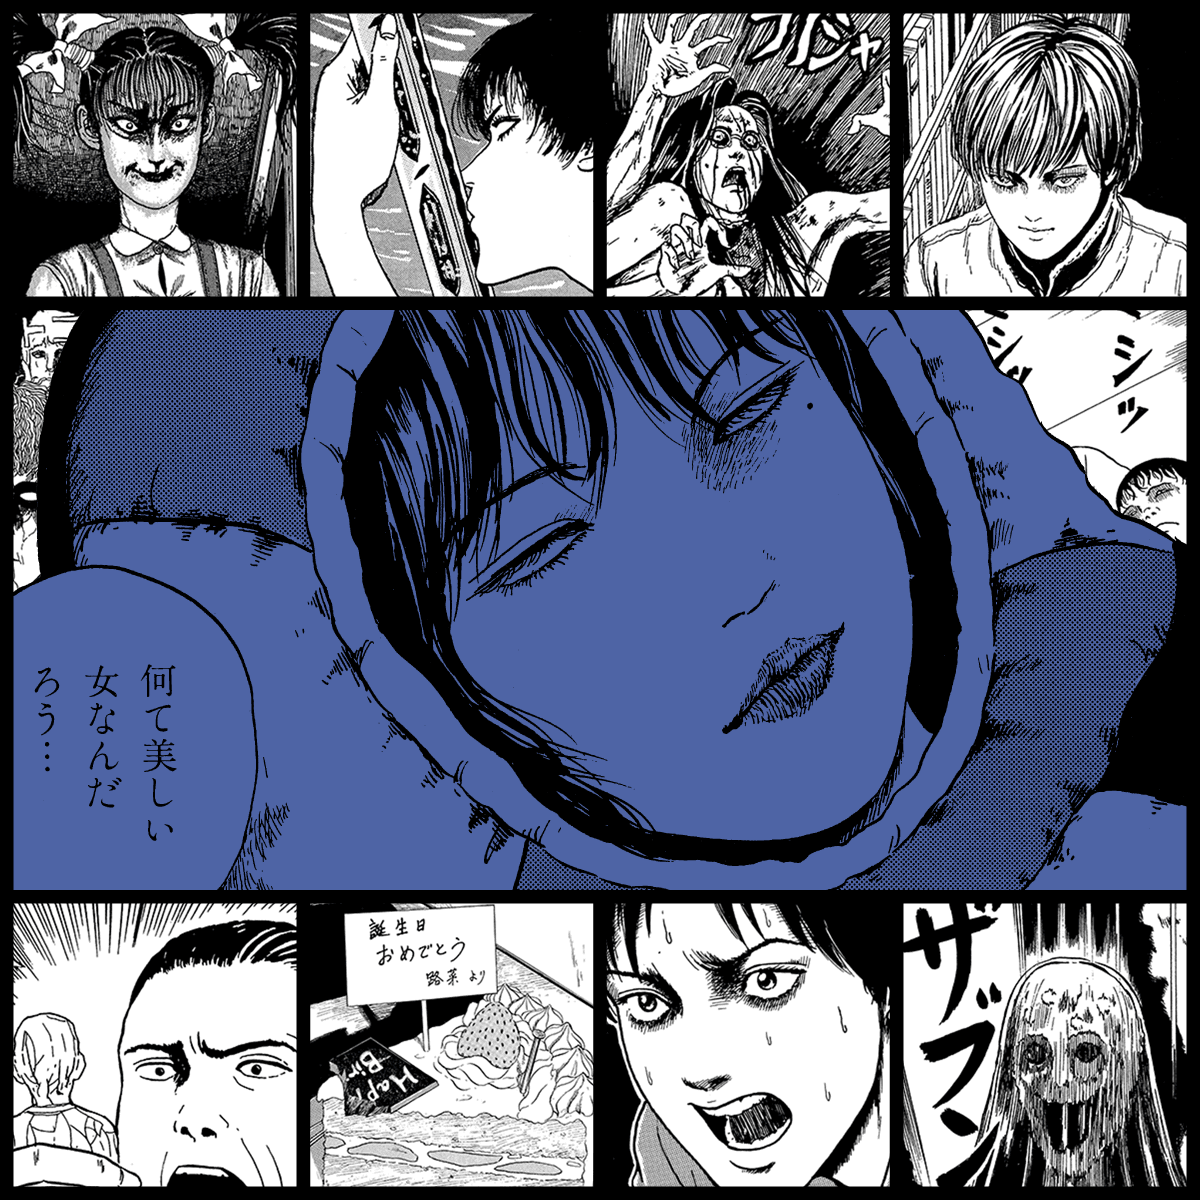 TOMIE by Junji Ito #23